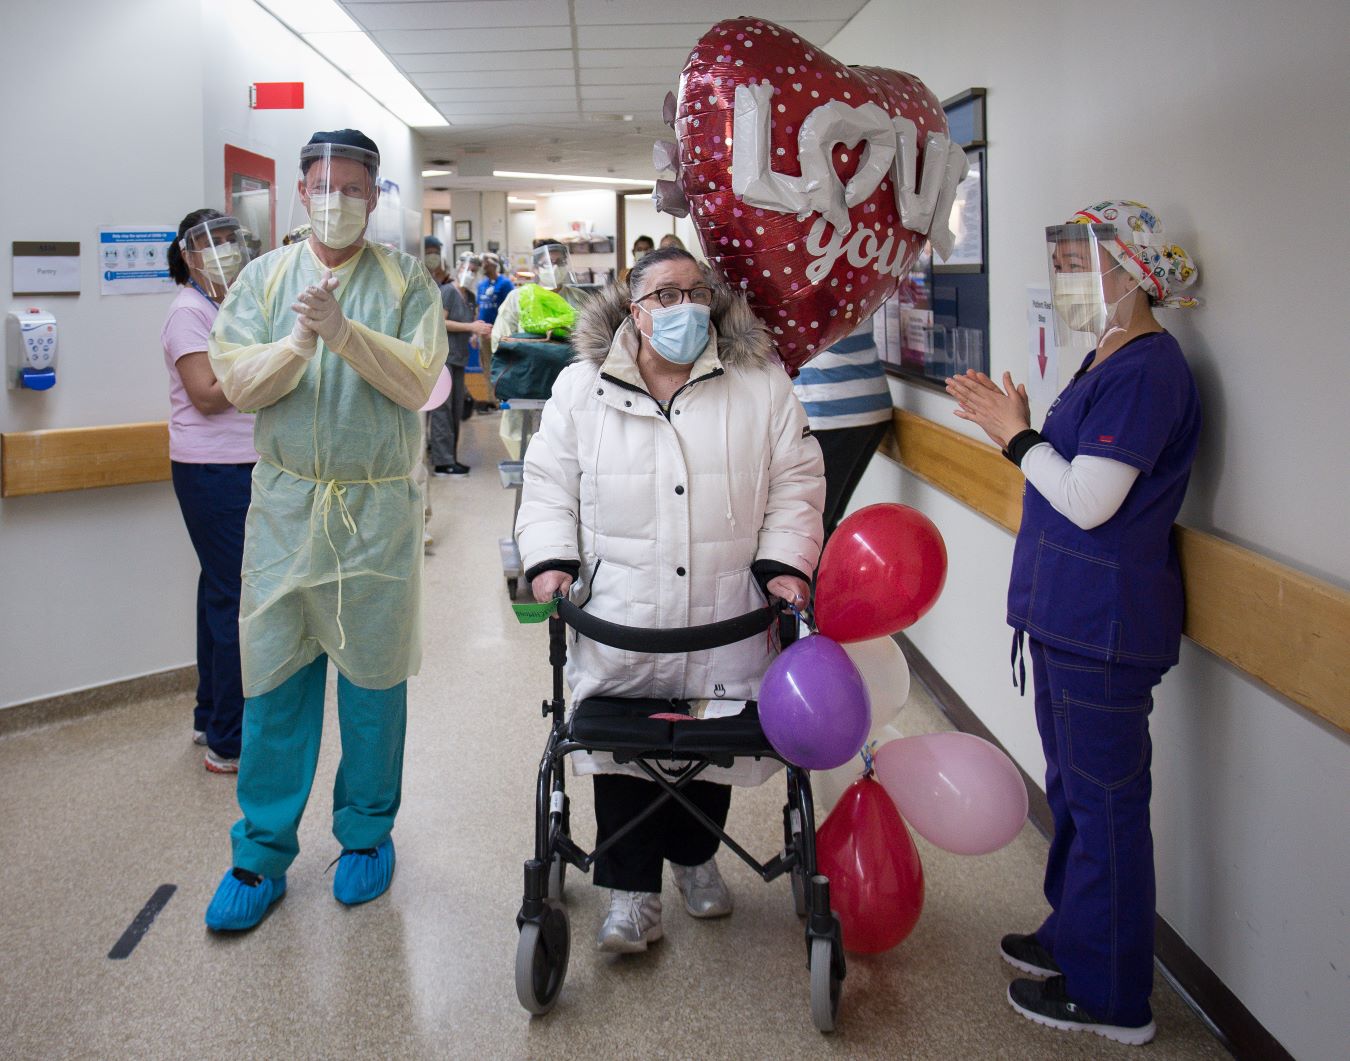 Patient with walker with balloons attached, walks down hospital hall with hospital staff clapping.